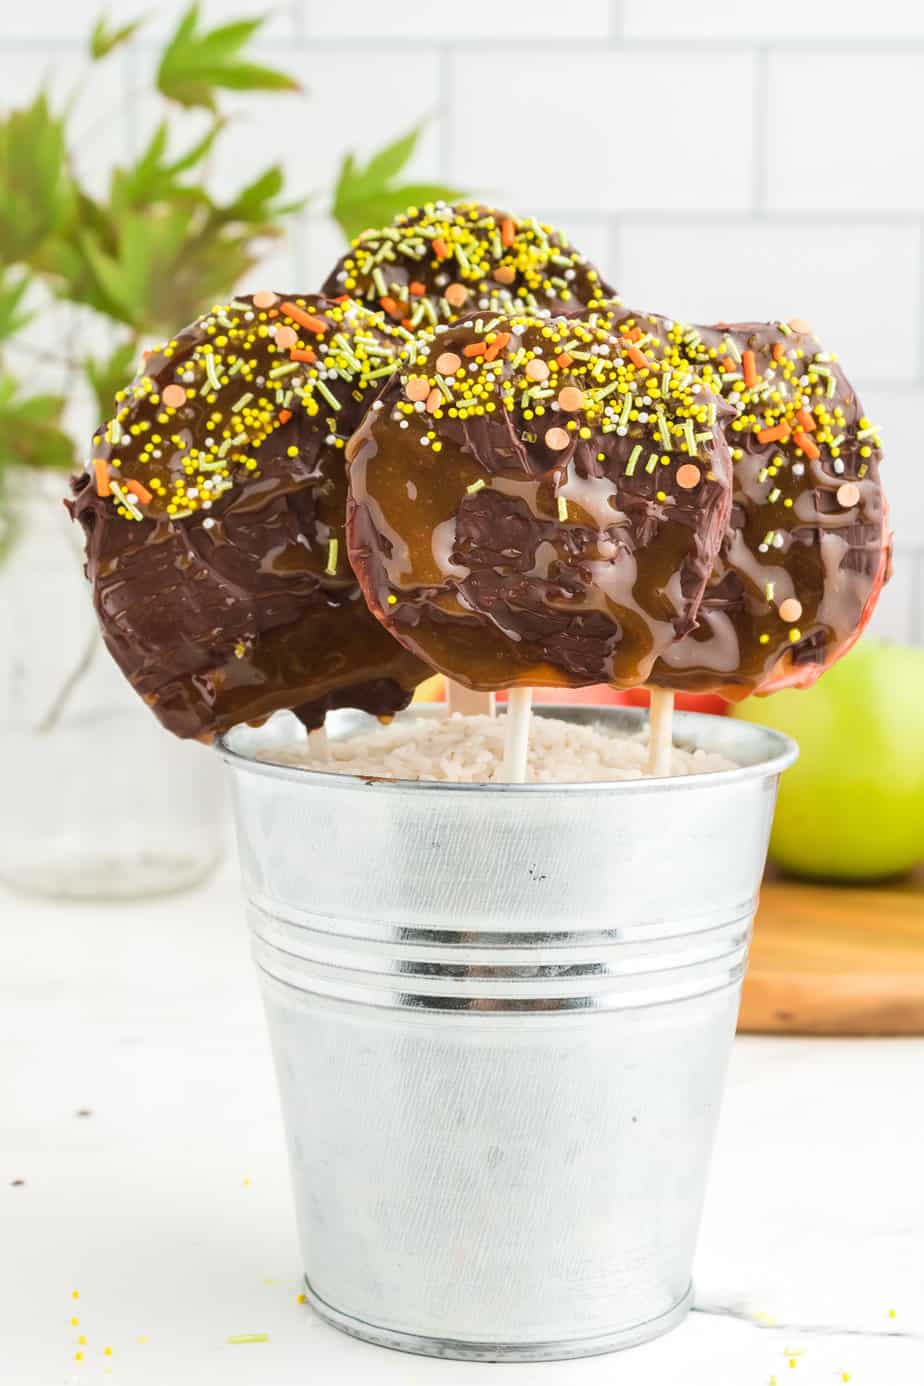 Slices of apple on sticks covered in caramel, chocolate and sprinkles in a metal pot full of dry rice standing upright on a kitchen counter from the side.